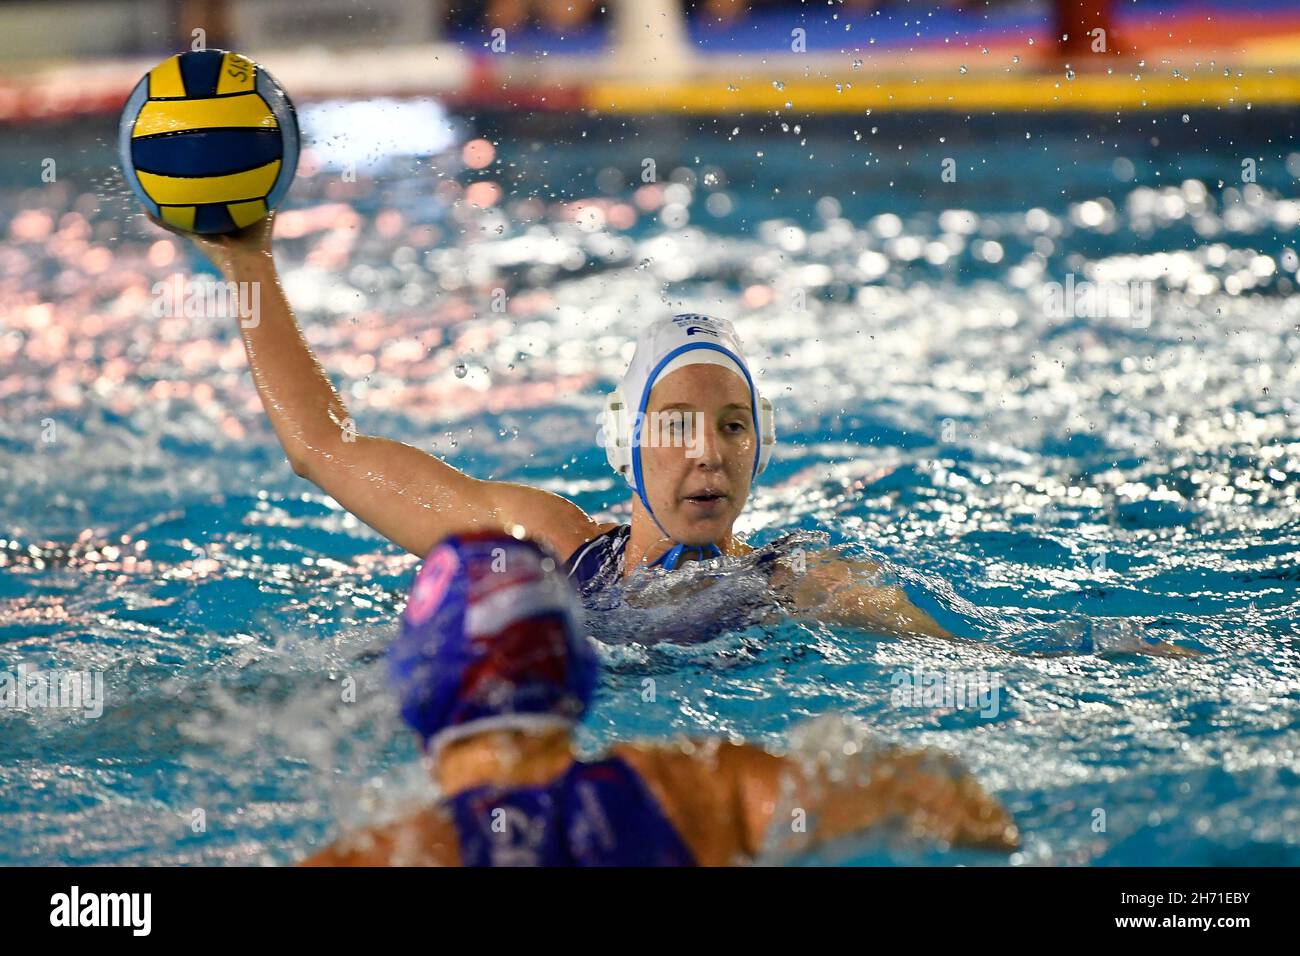 (11/18/2021) Jaqueline KOHLI of Lille UC (FRA)  in action during the Waterpolo Euro League Women, Group B, Day 1 between Lille UC and Sirens Malta at Polo Natatorio, 18th November, 2021 in Rome, Italy. (Photo by Domenico Cippitelli/Pacific Press/Sipa USA) Stock Photo